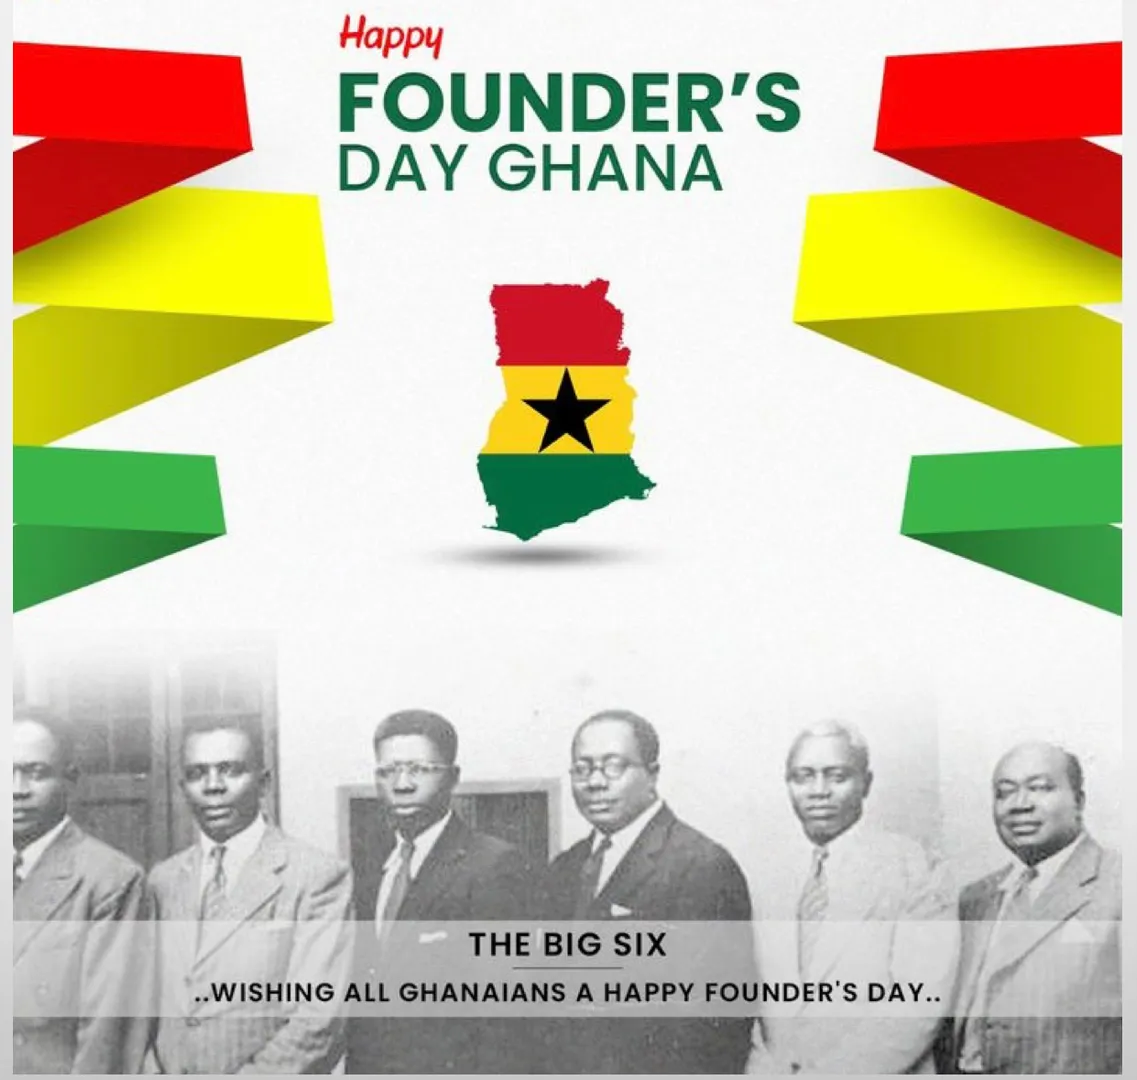 Happy Founder's Day, Ghana! 🇬🇭 Today, we celebrate the visionaries and leaders who laid the foundation for our beloved nation. Let's honor their legacy by fostering unity, progress, and prosperity. Together, we can build a brighter future for all Ghanaians. Wishing you a day filled with pride and joy! #GhanaFoundersDay #ProudGhanaian 🎉🎊